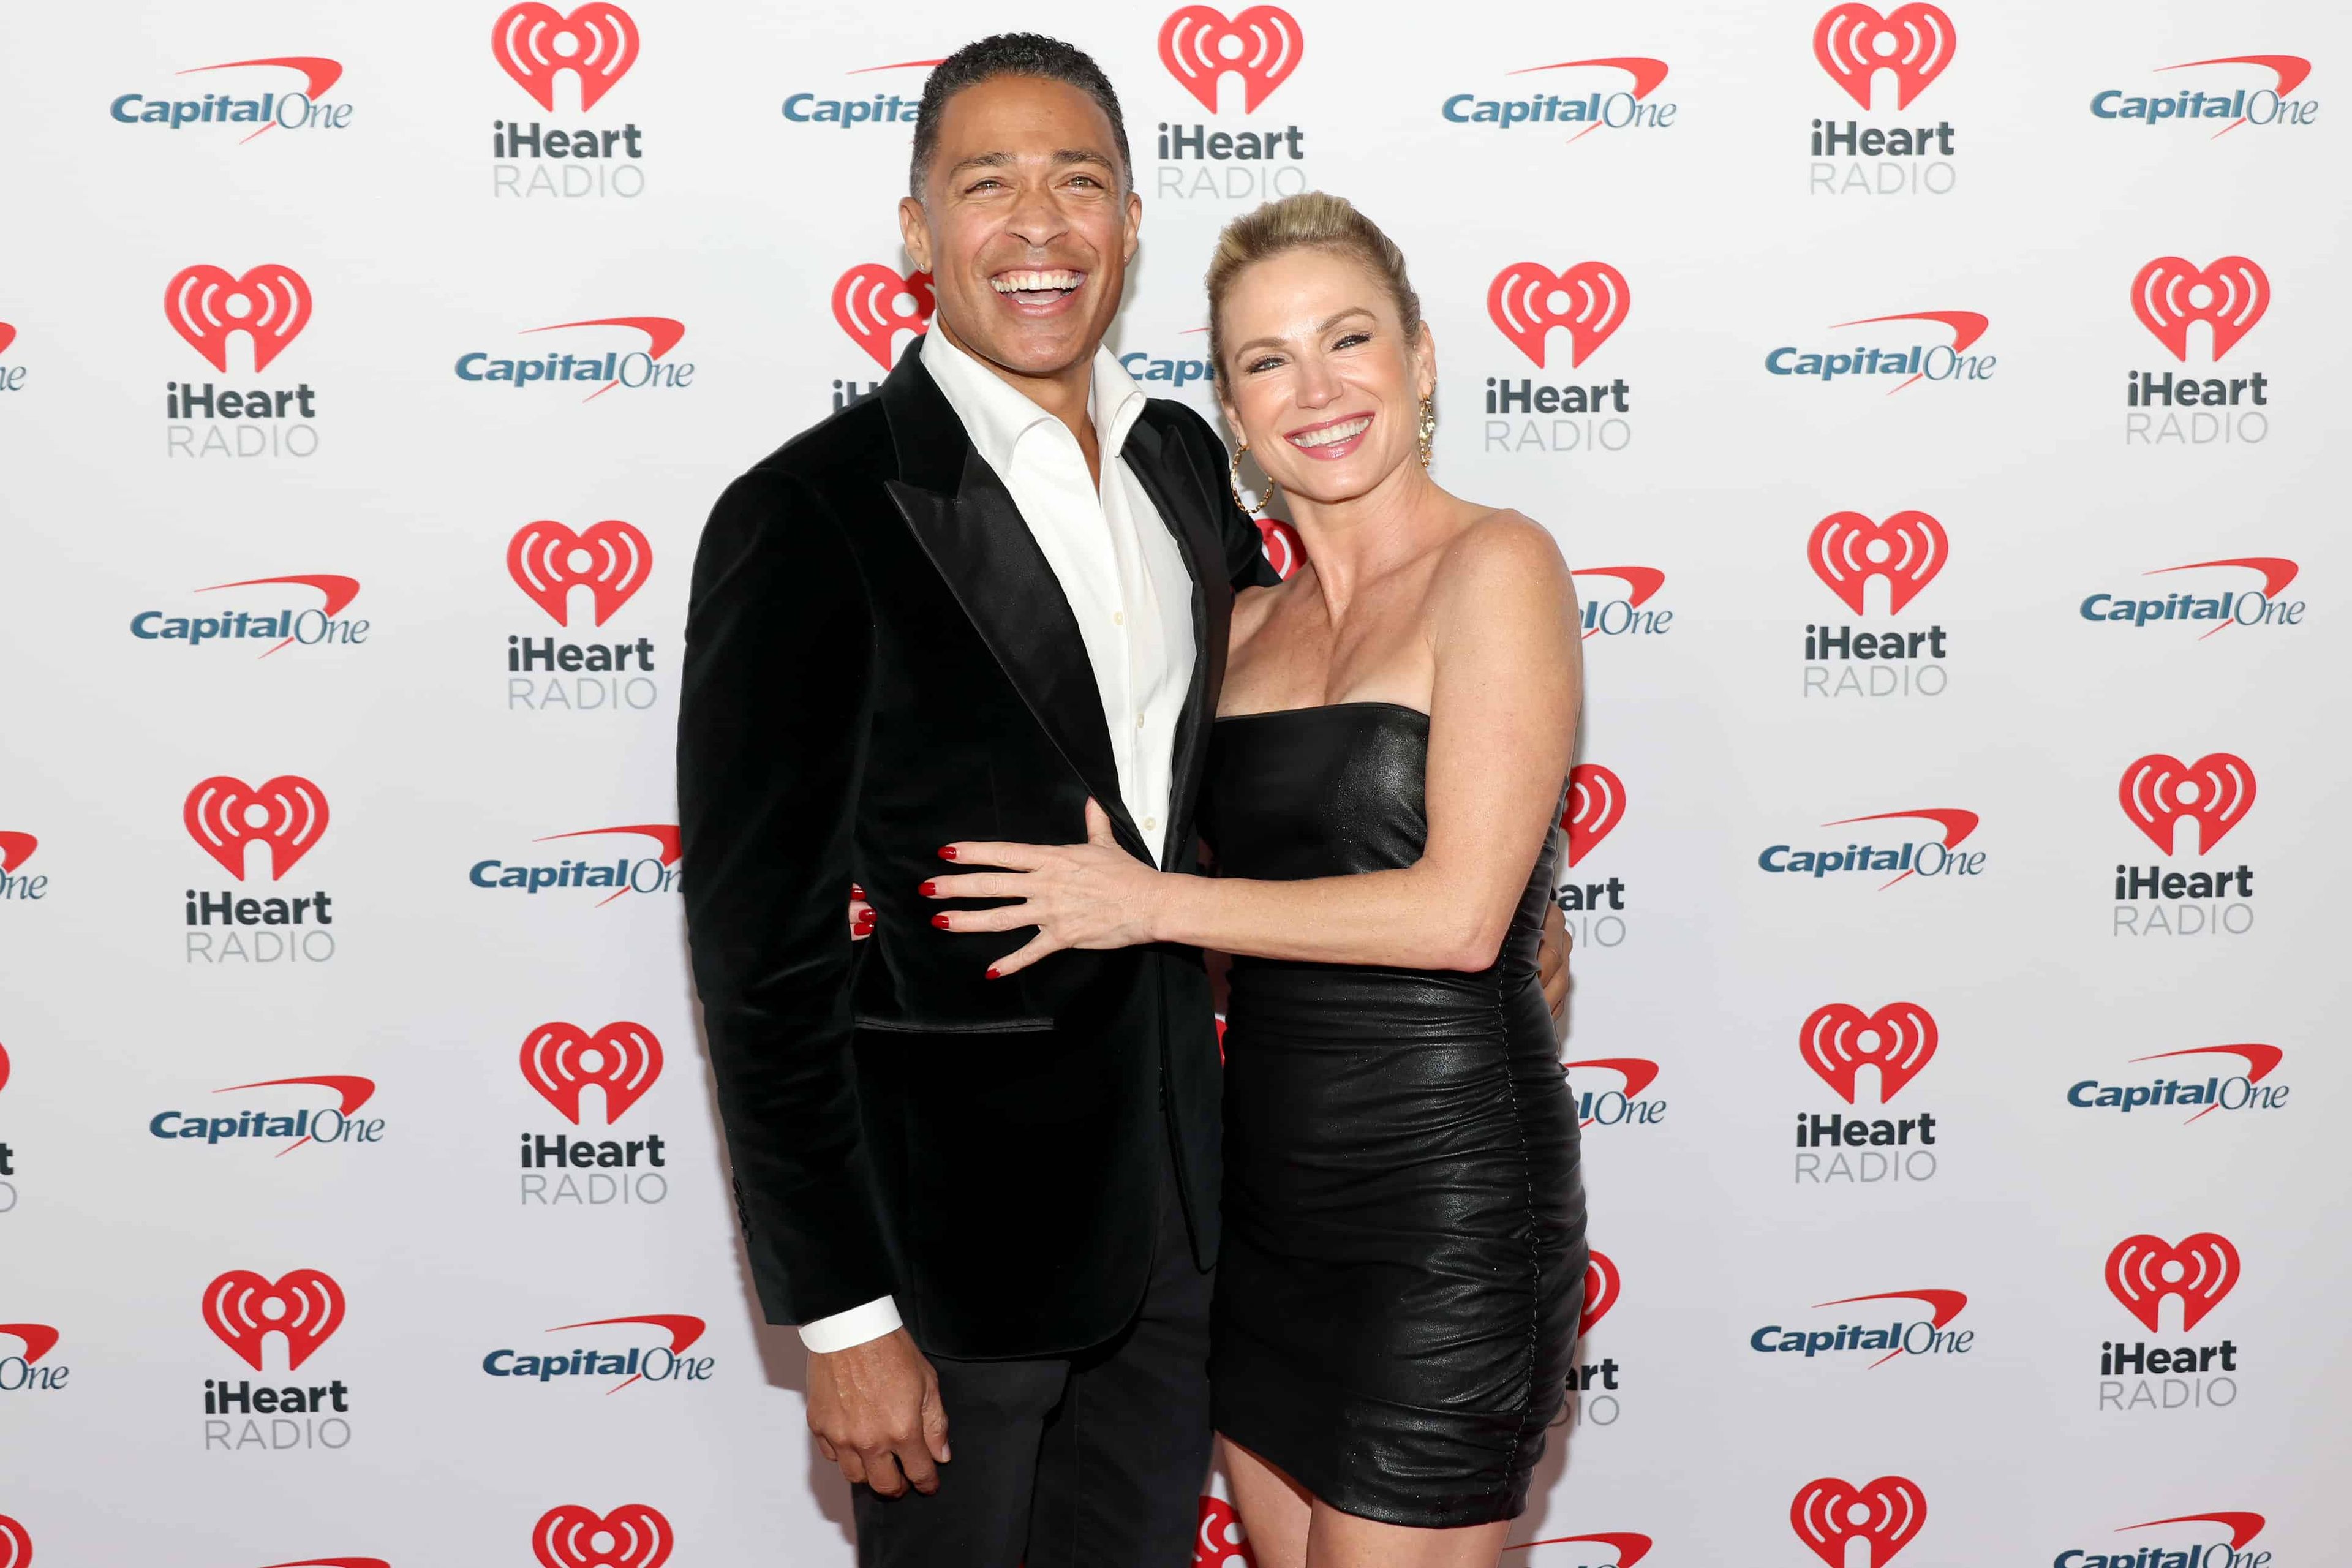 Amy Robach And T.J. Holmes' Exes Reportedly Dating Each Other